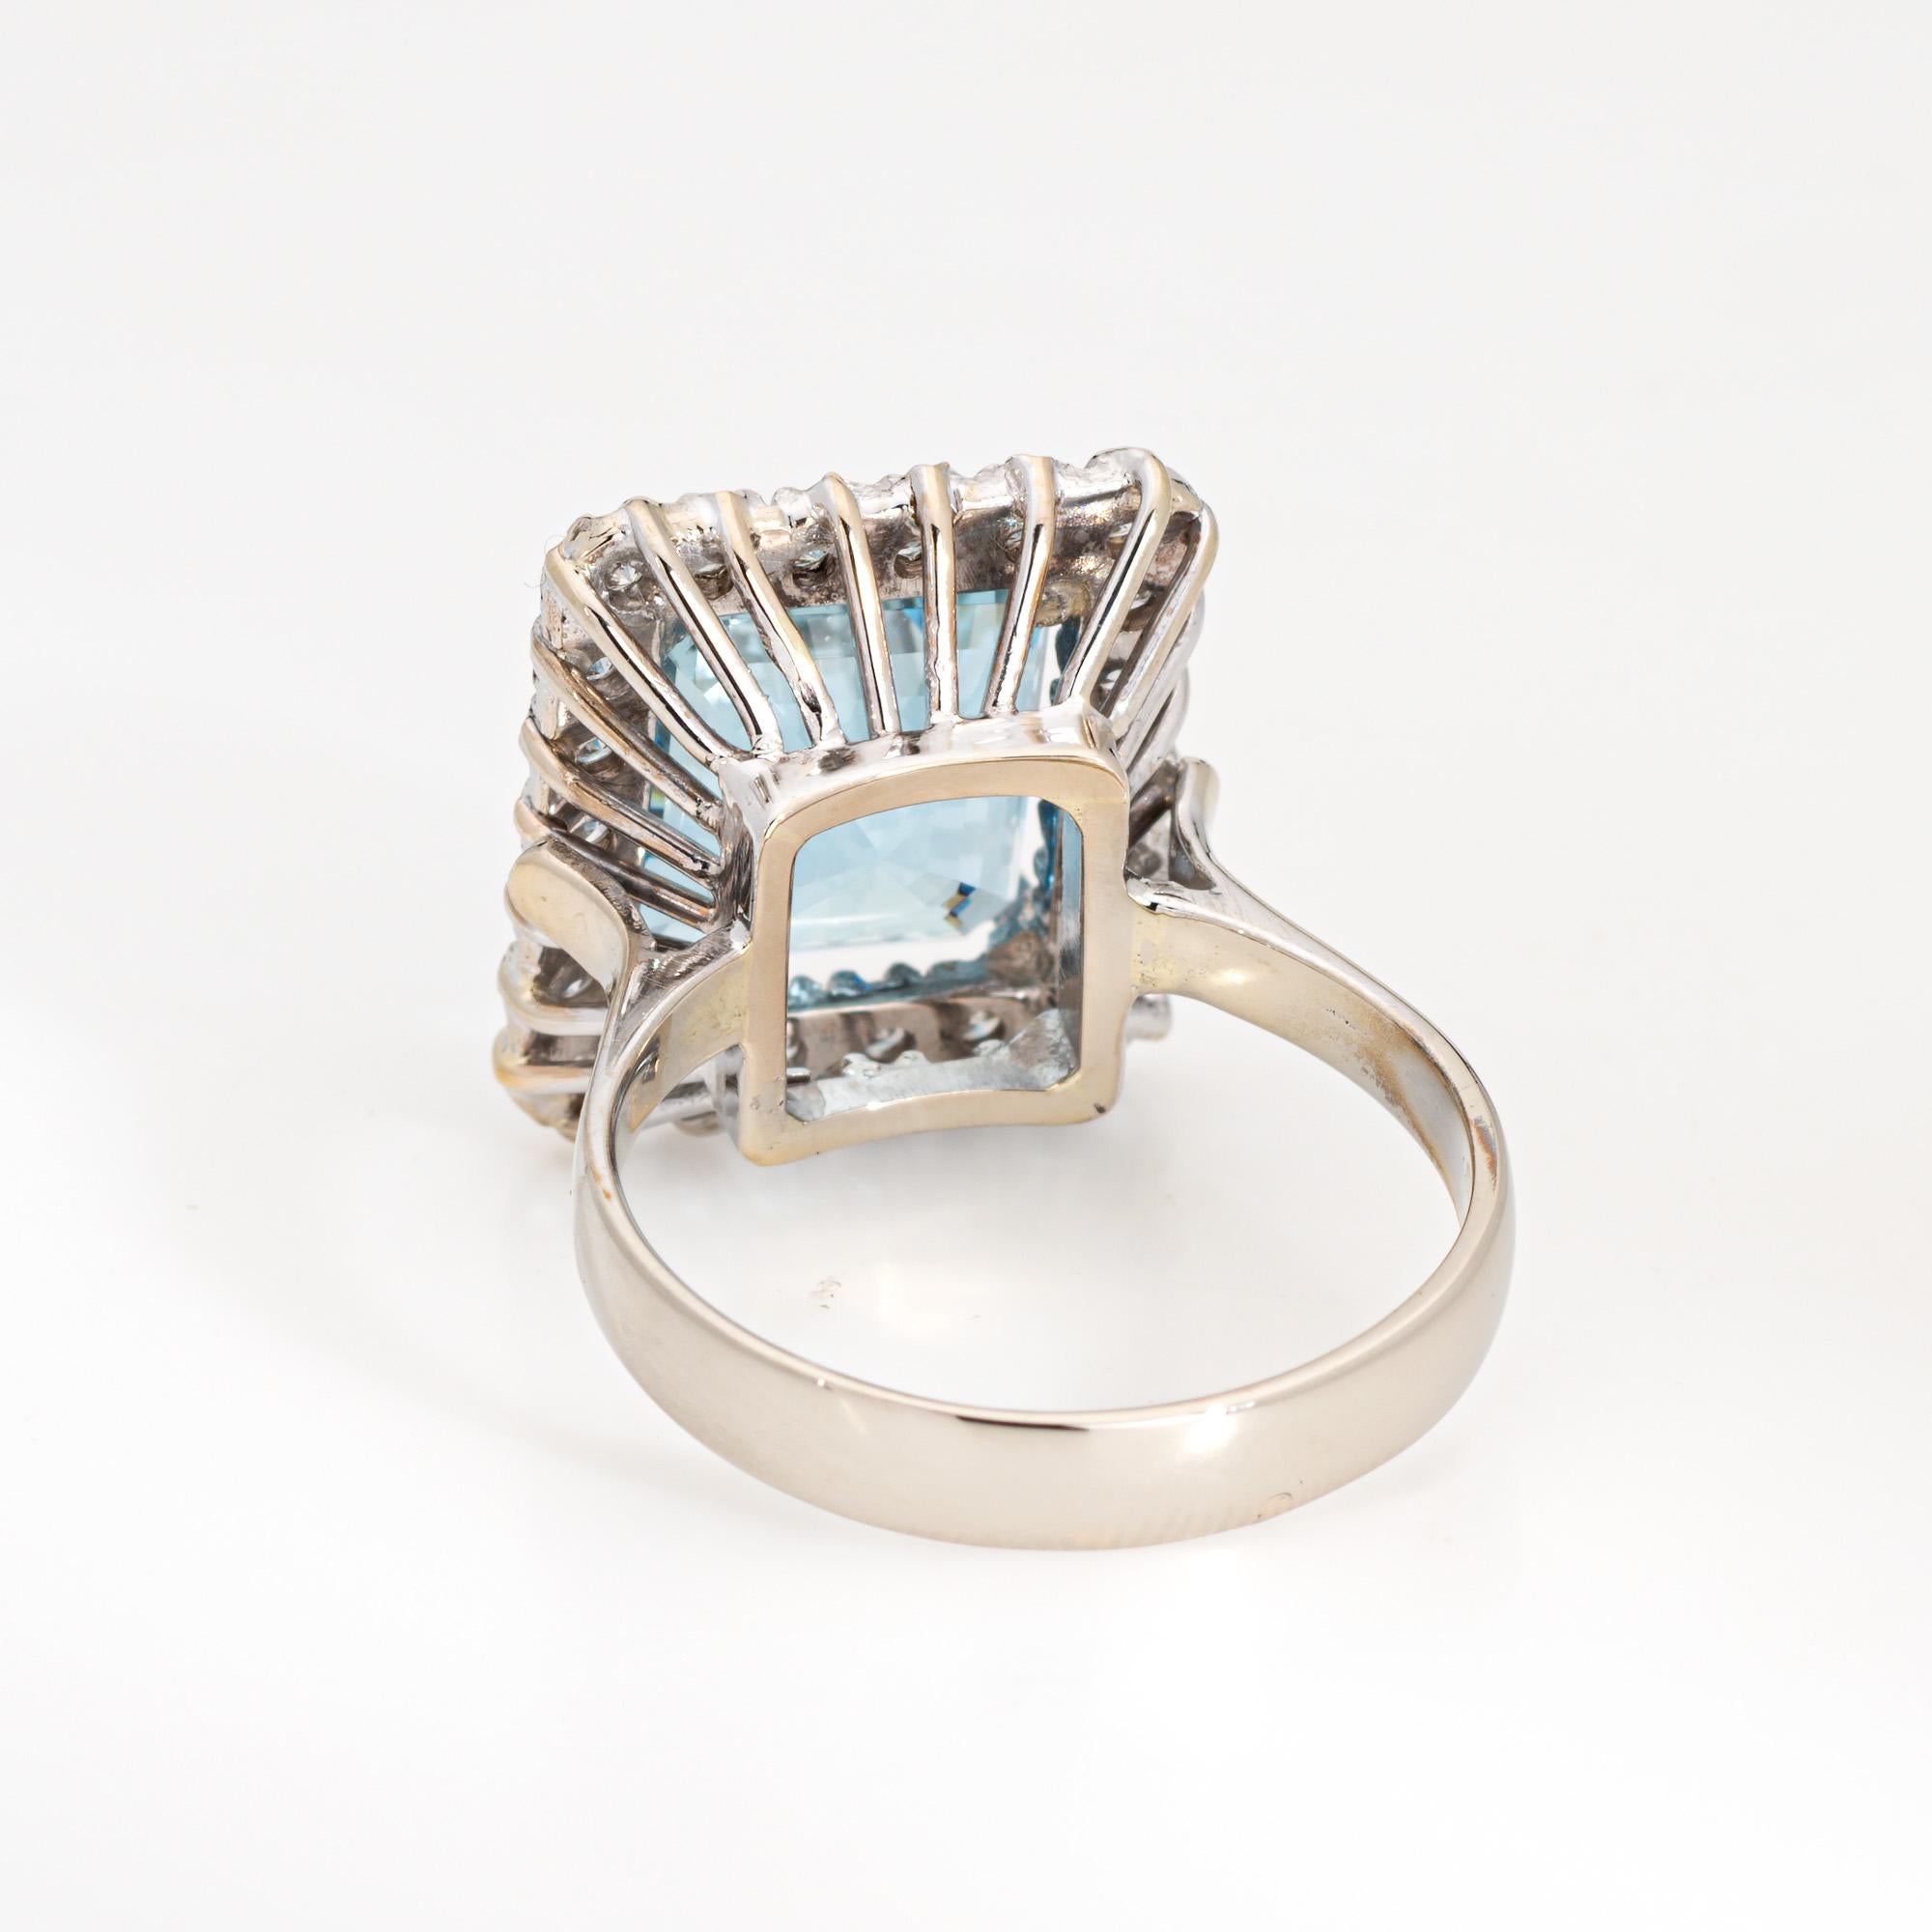 5.35ct Aquamarine Diamond Square Ring Vintage 18k White Gold Cocktail Jewelry In Good Condition For Sale In Torrance, CA